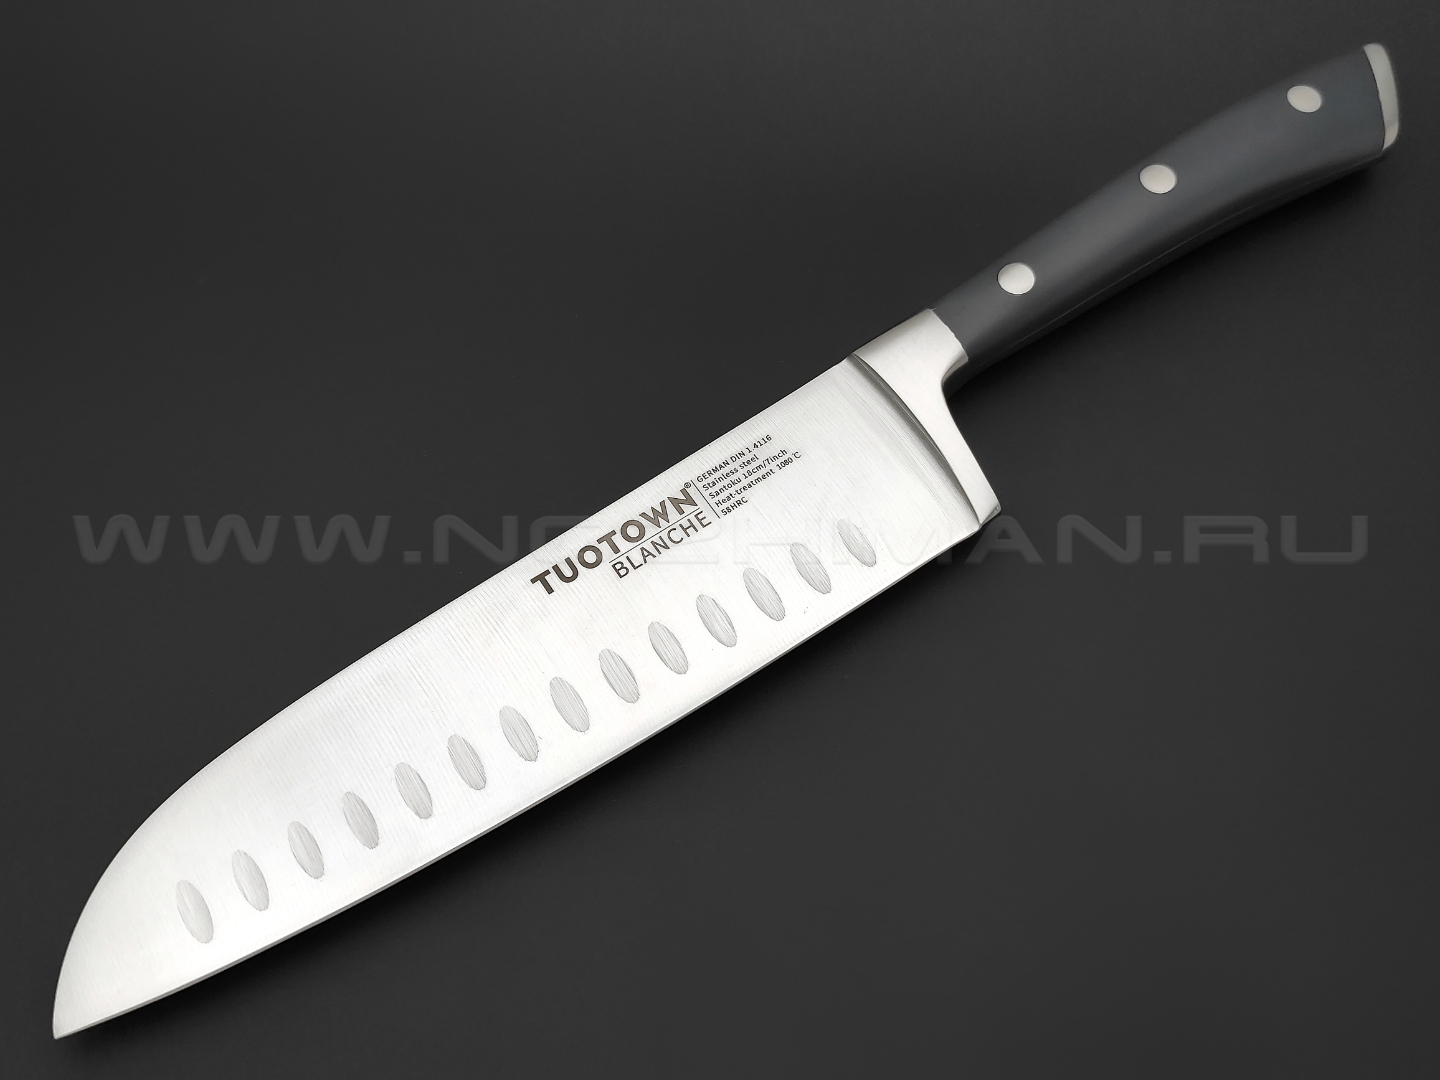 TuoTown Blanche Santoku 307008 сталь German 1.4116, рукоять Stainless steel, ABS